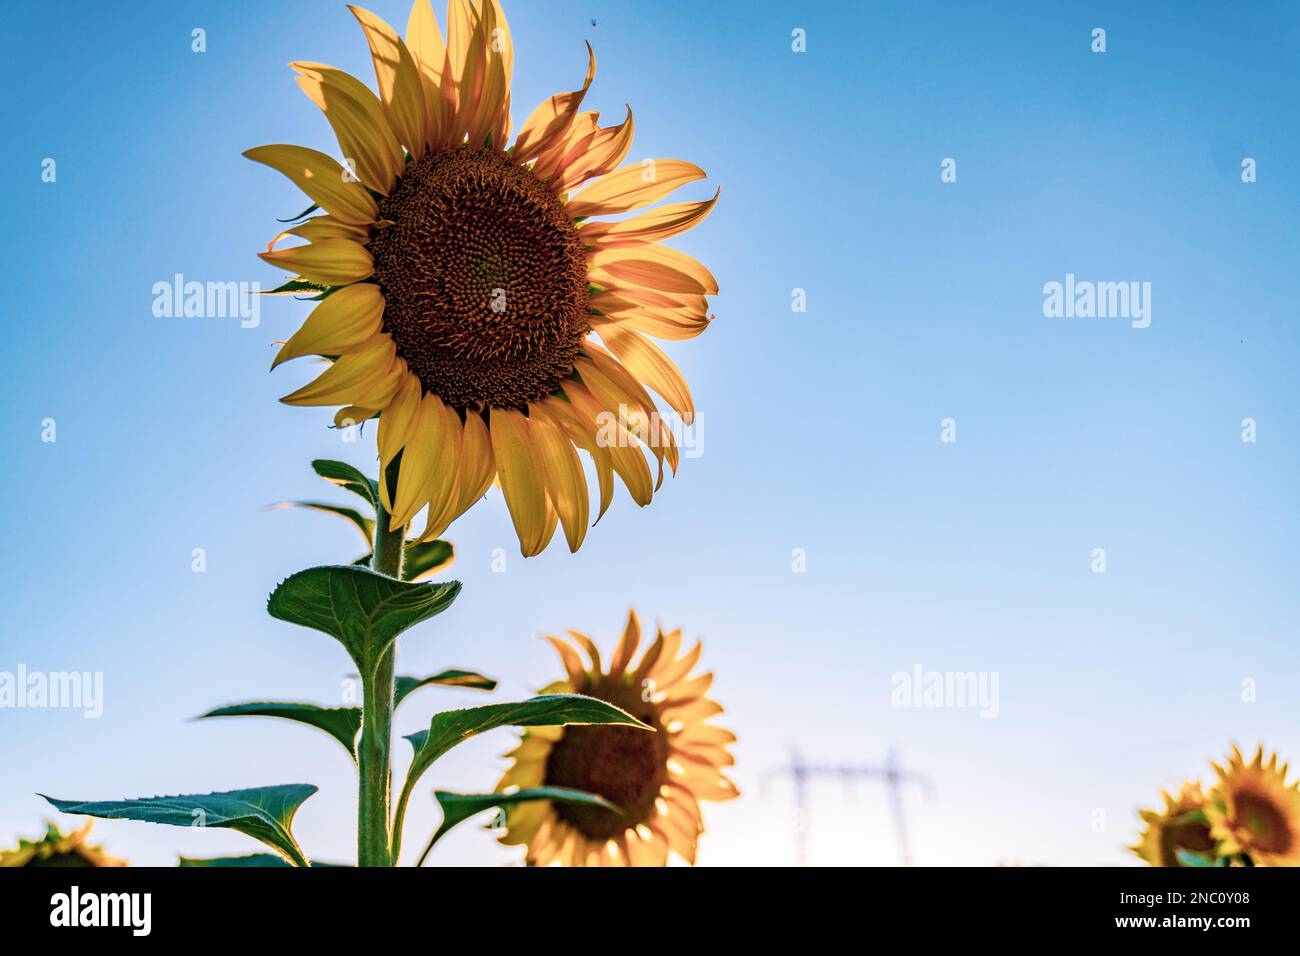 Sunflowers field rows in summer at golden hour sunset Stock Photo